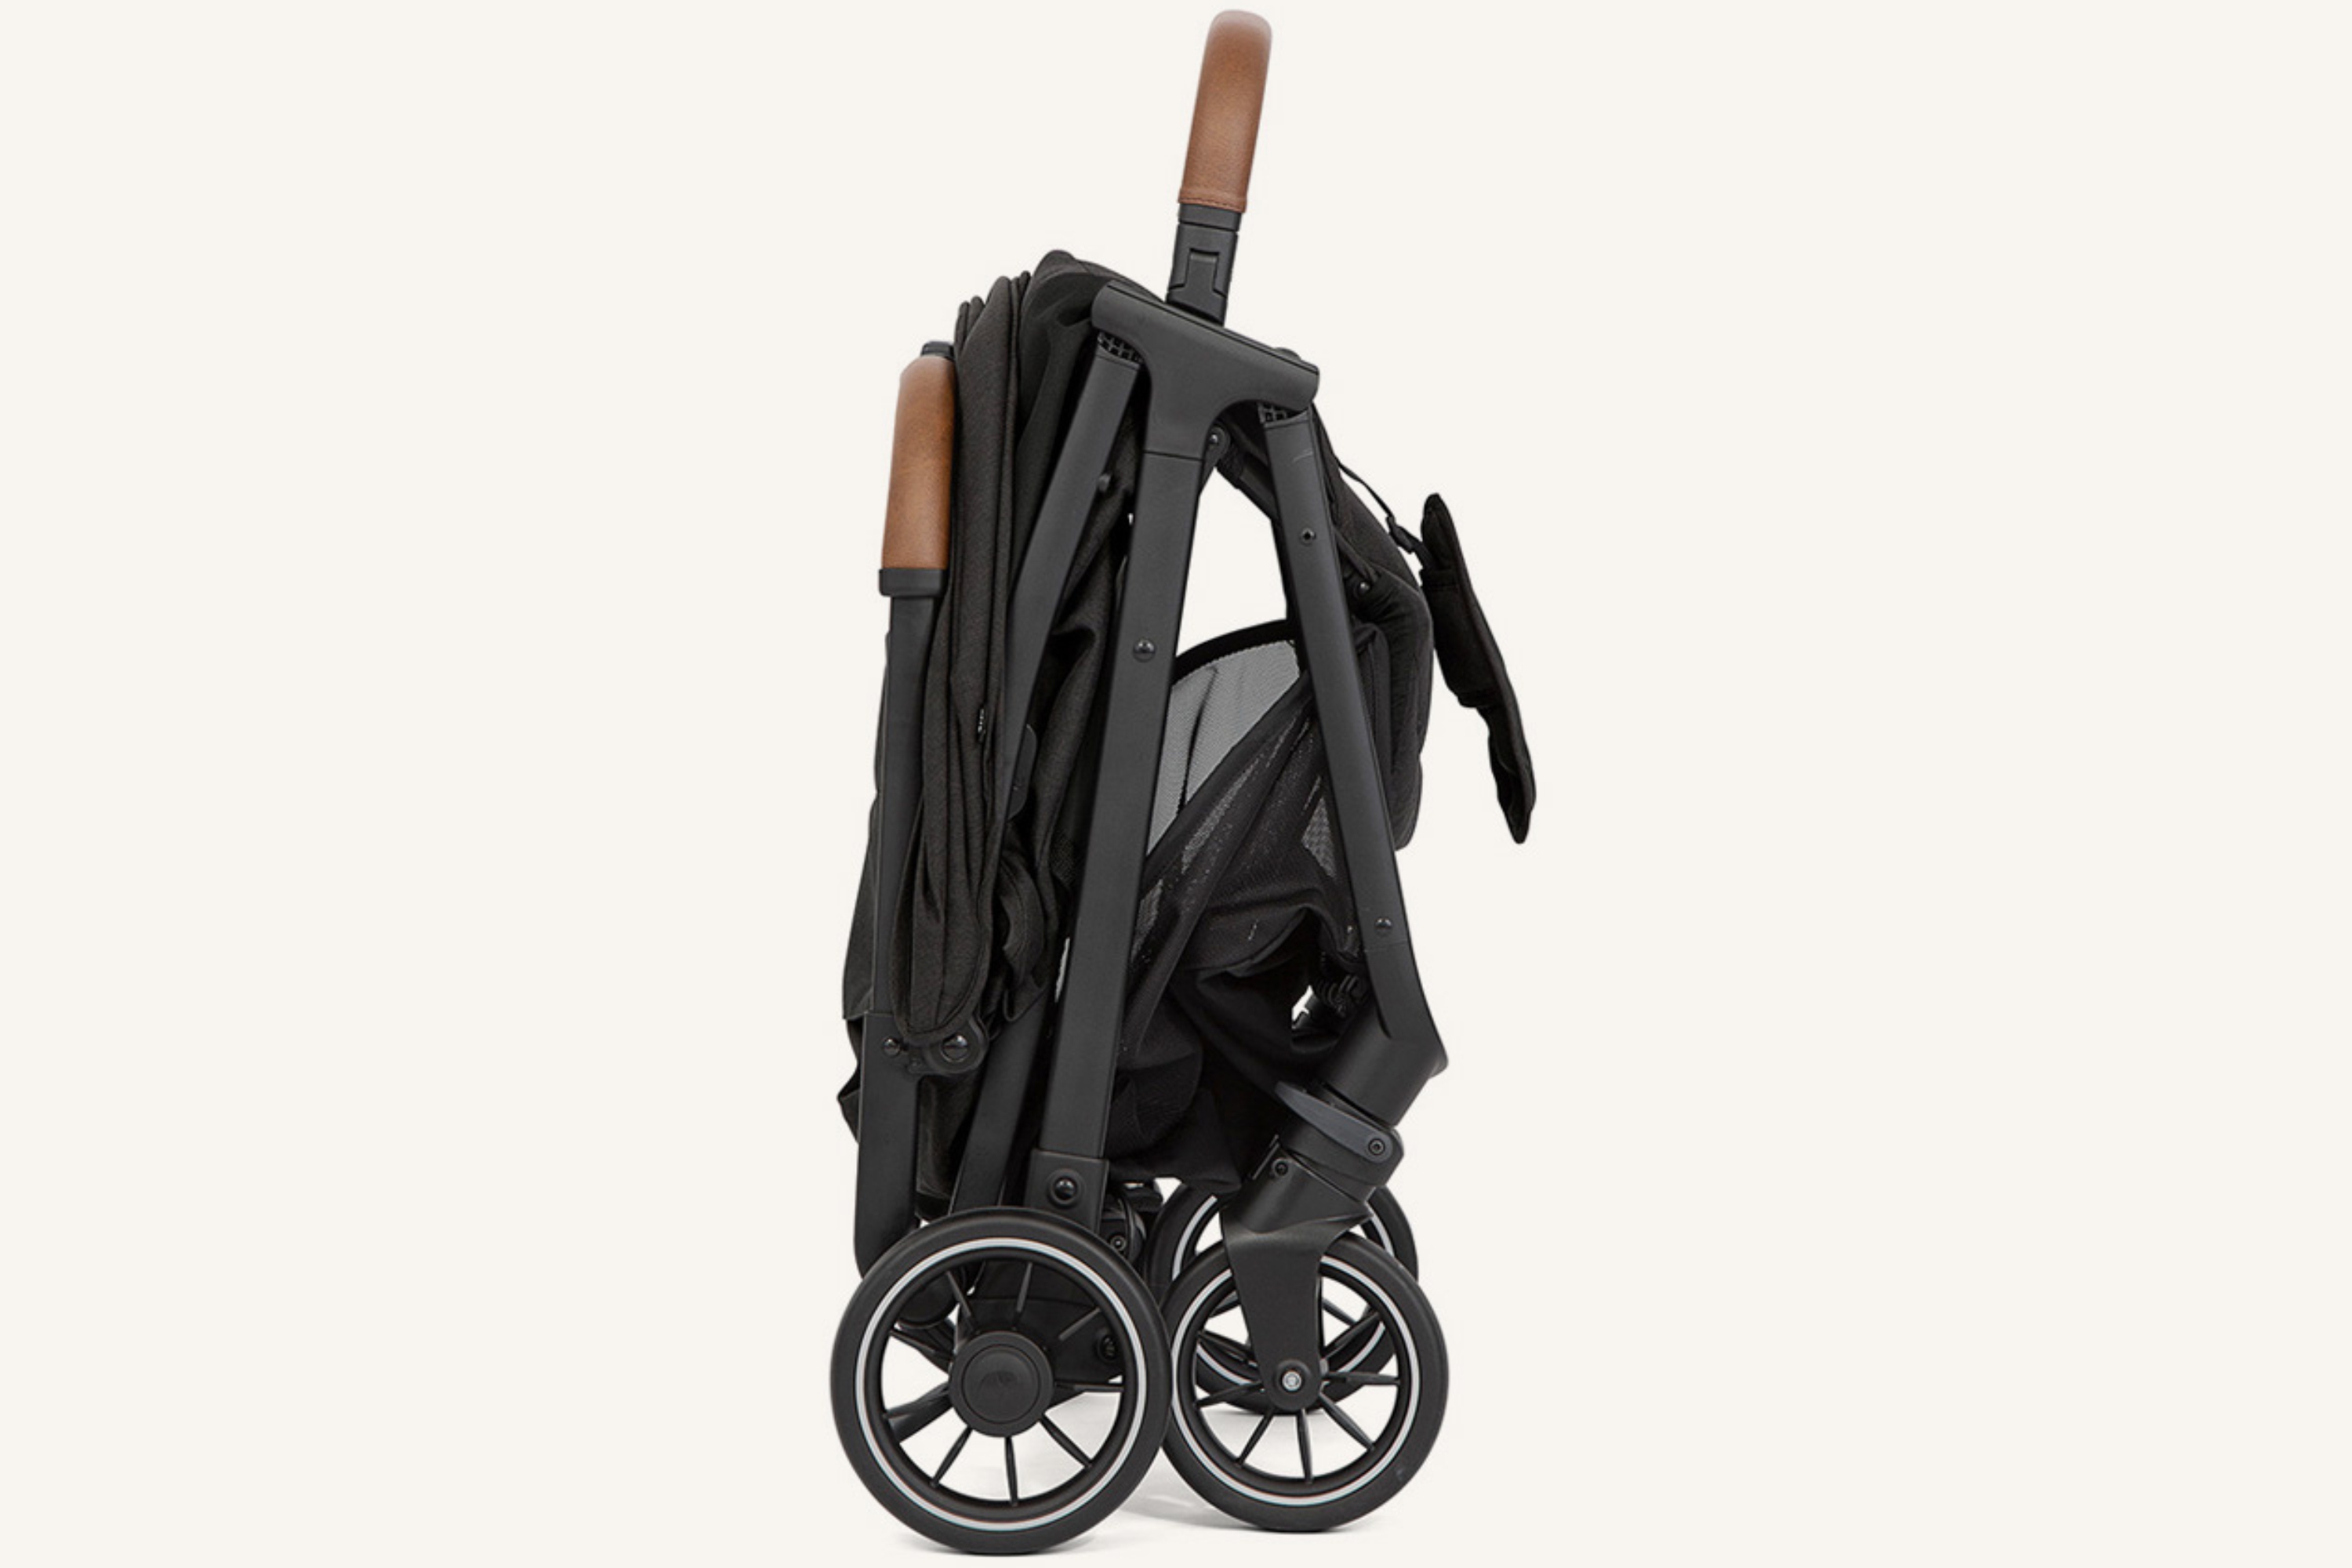 The Joie Pact Pro lightweight compact pushchair shown folded